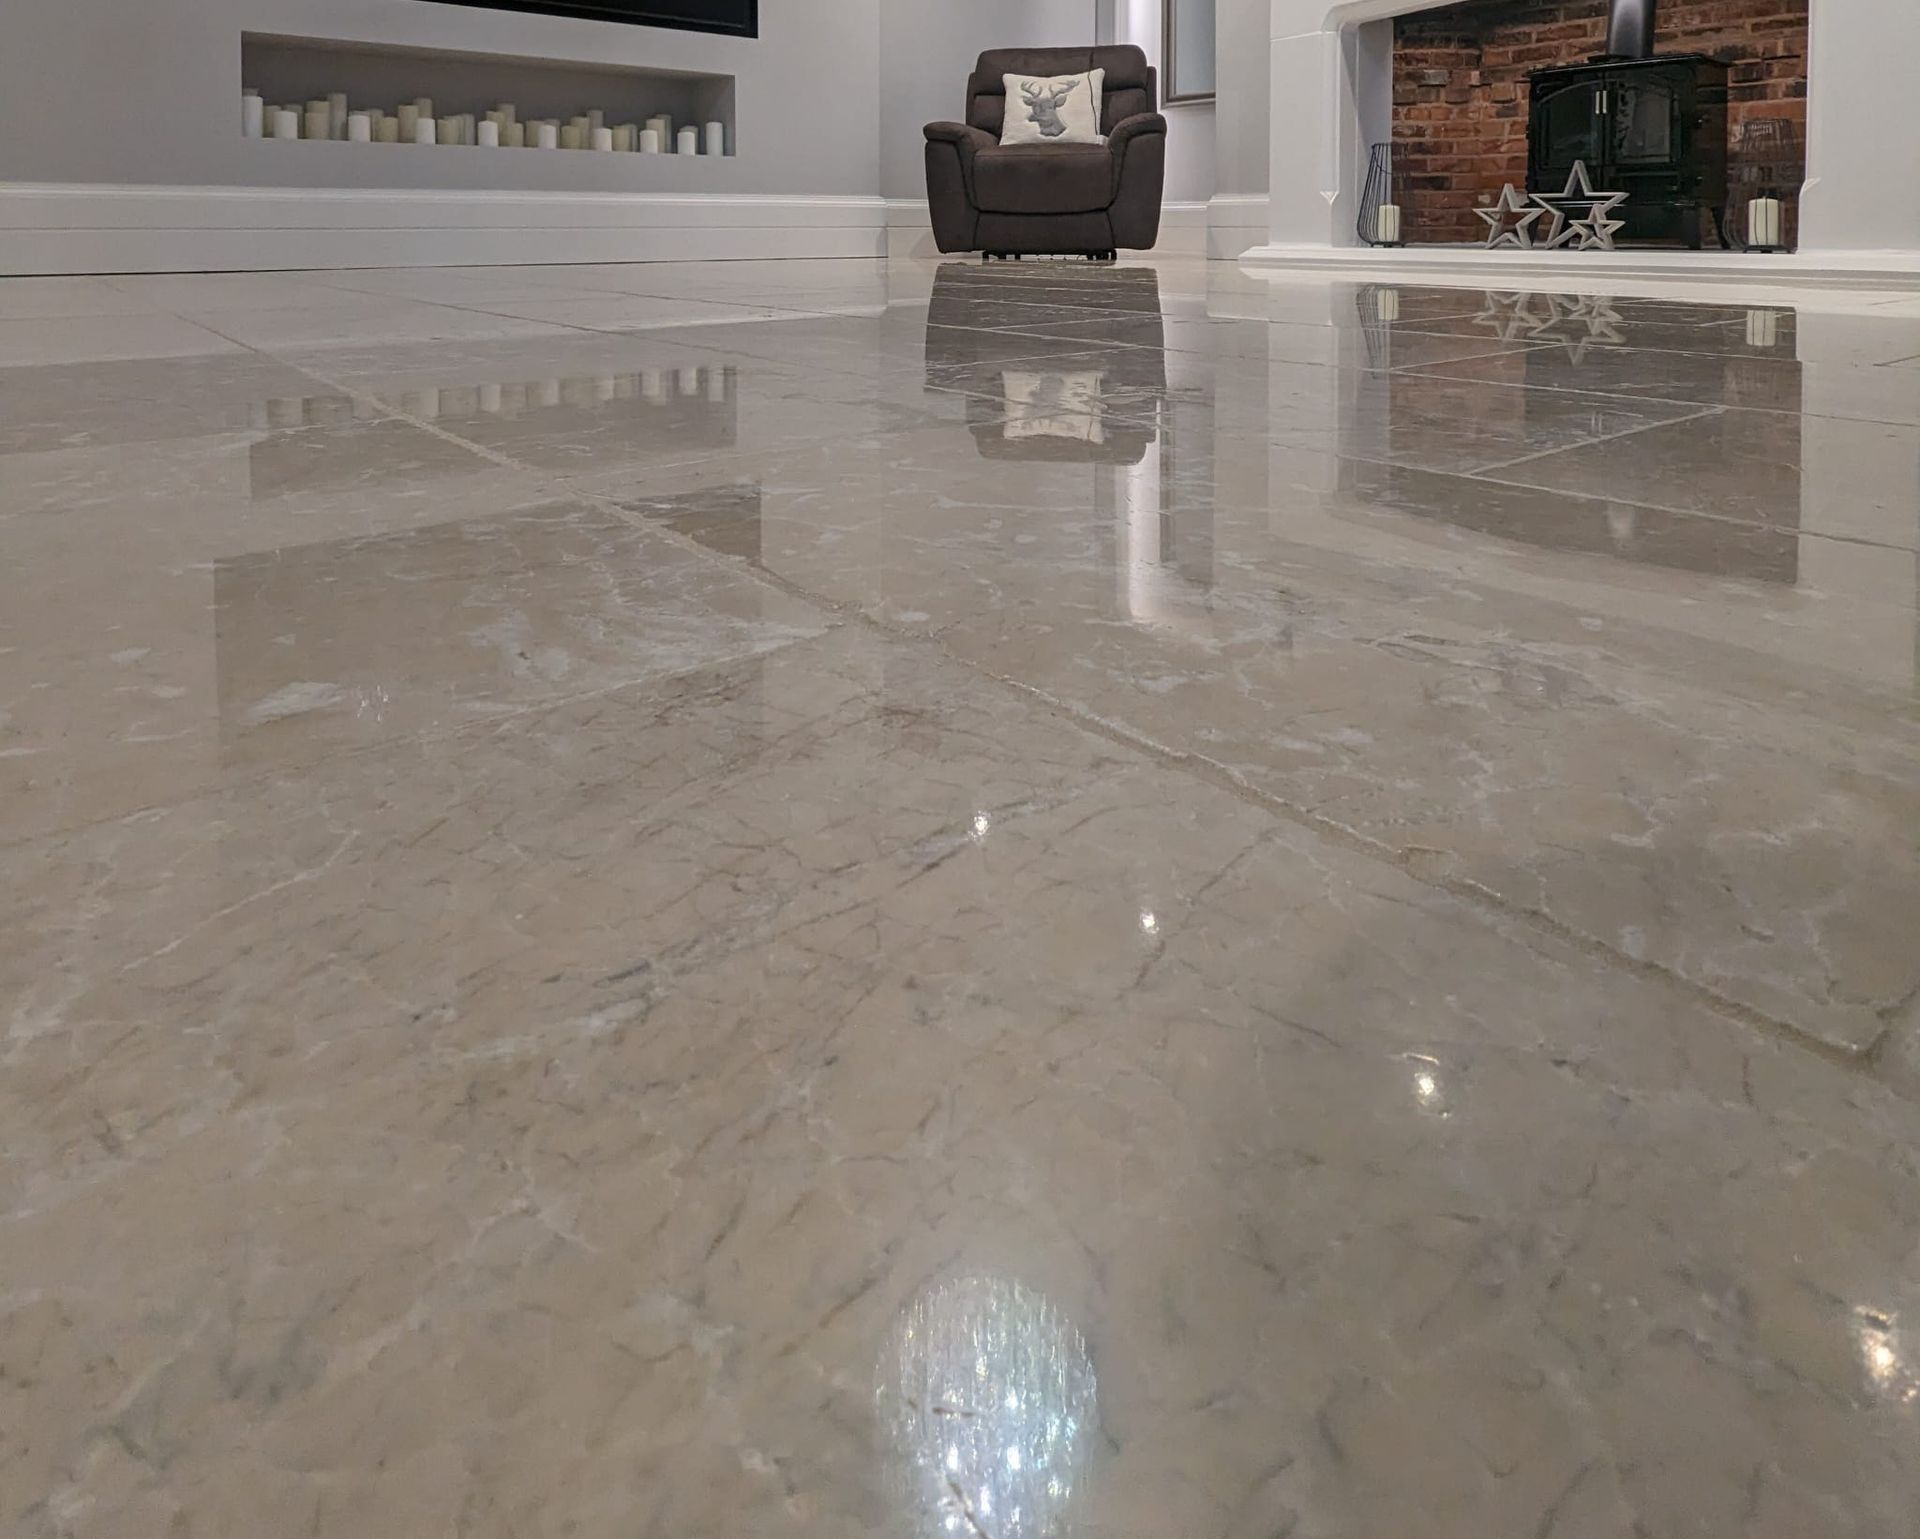 Limestone travertine deep cleaning, polishing, sealing and grout cleaning in Greater Manchester.